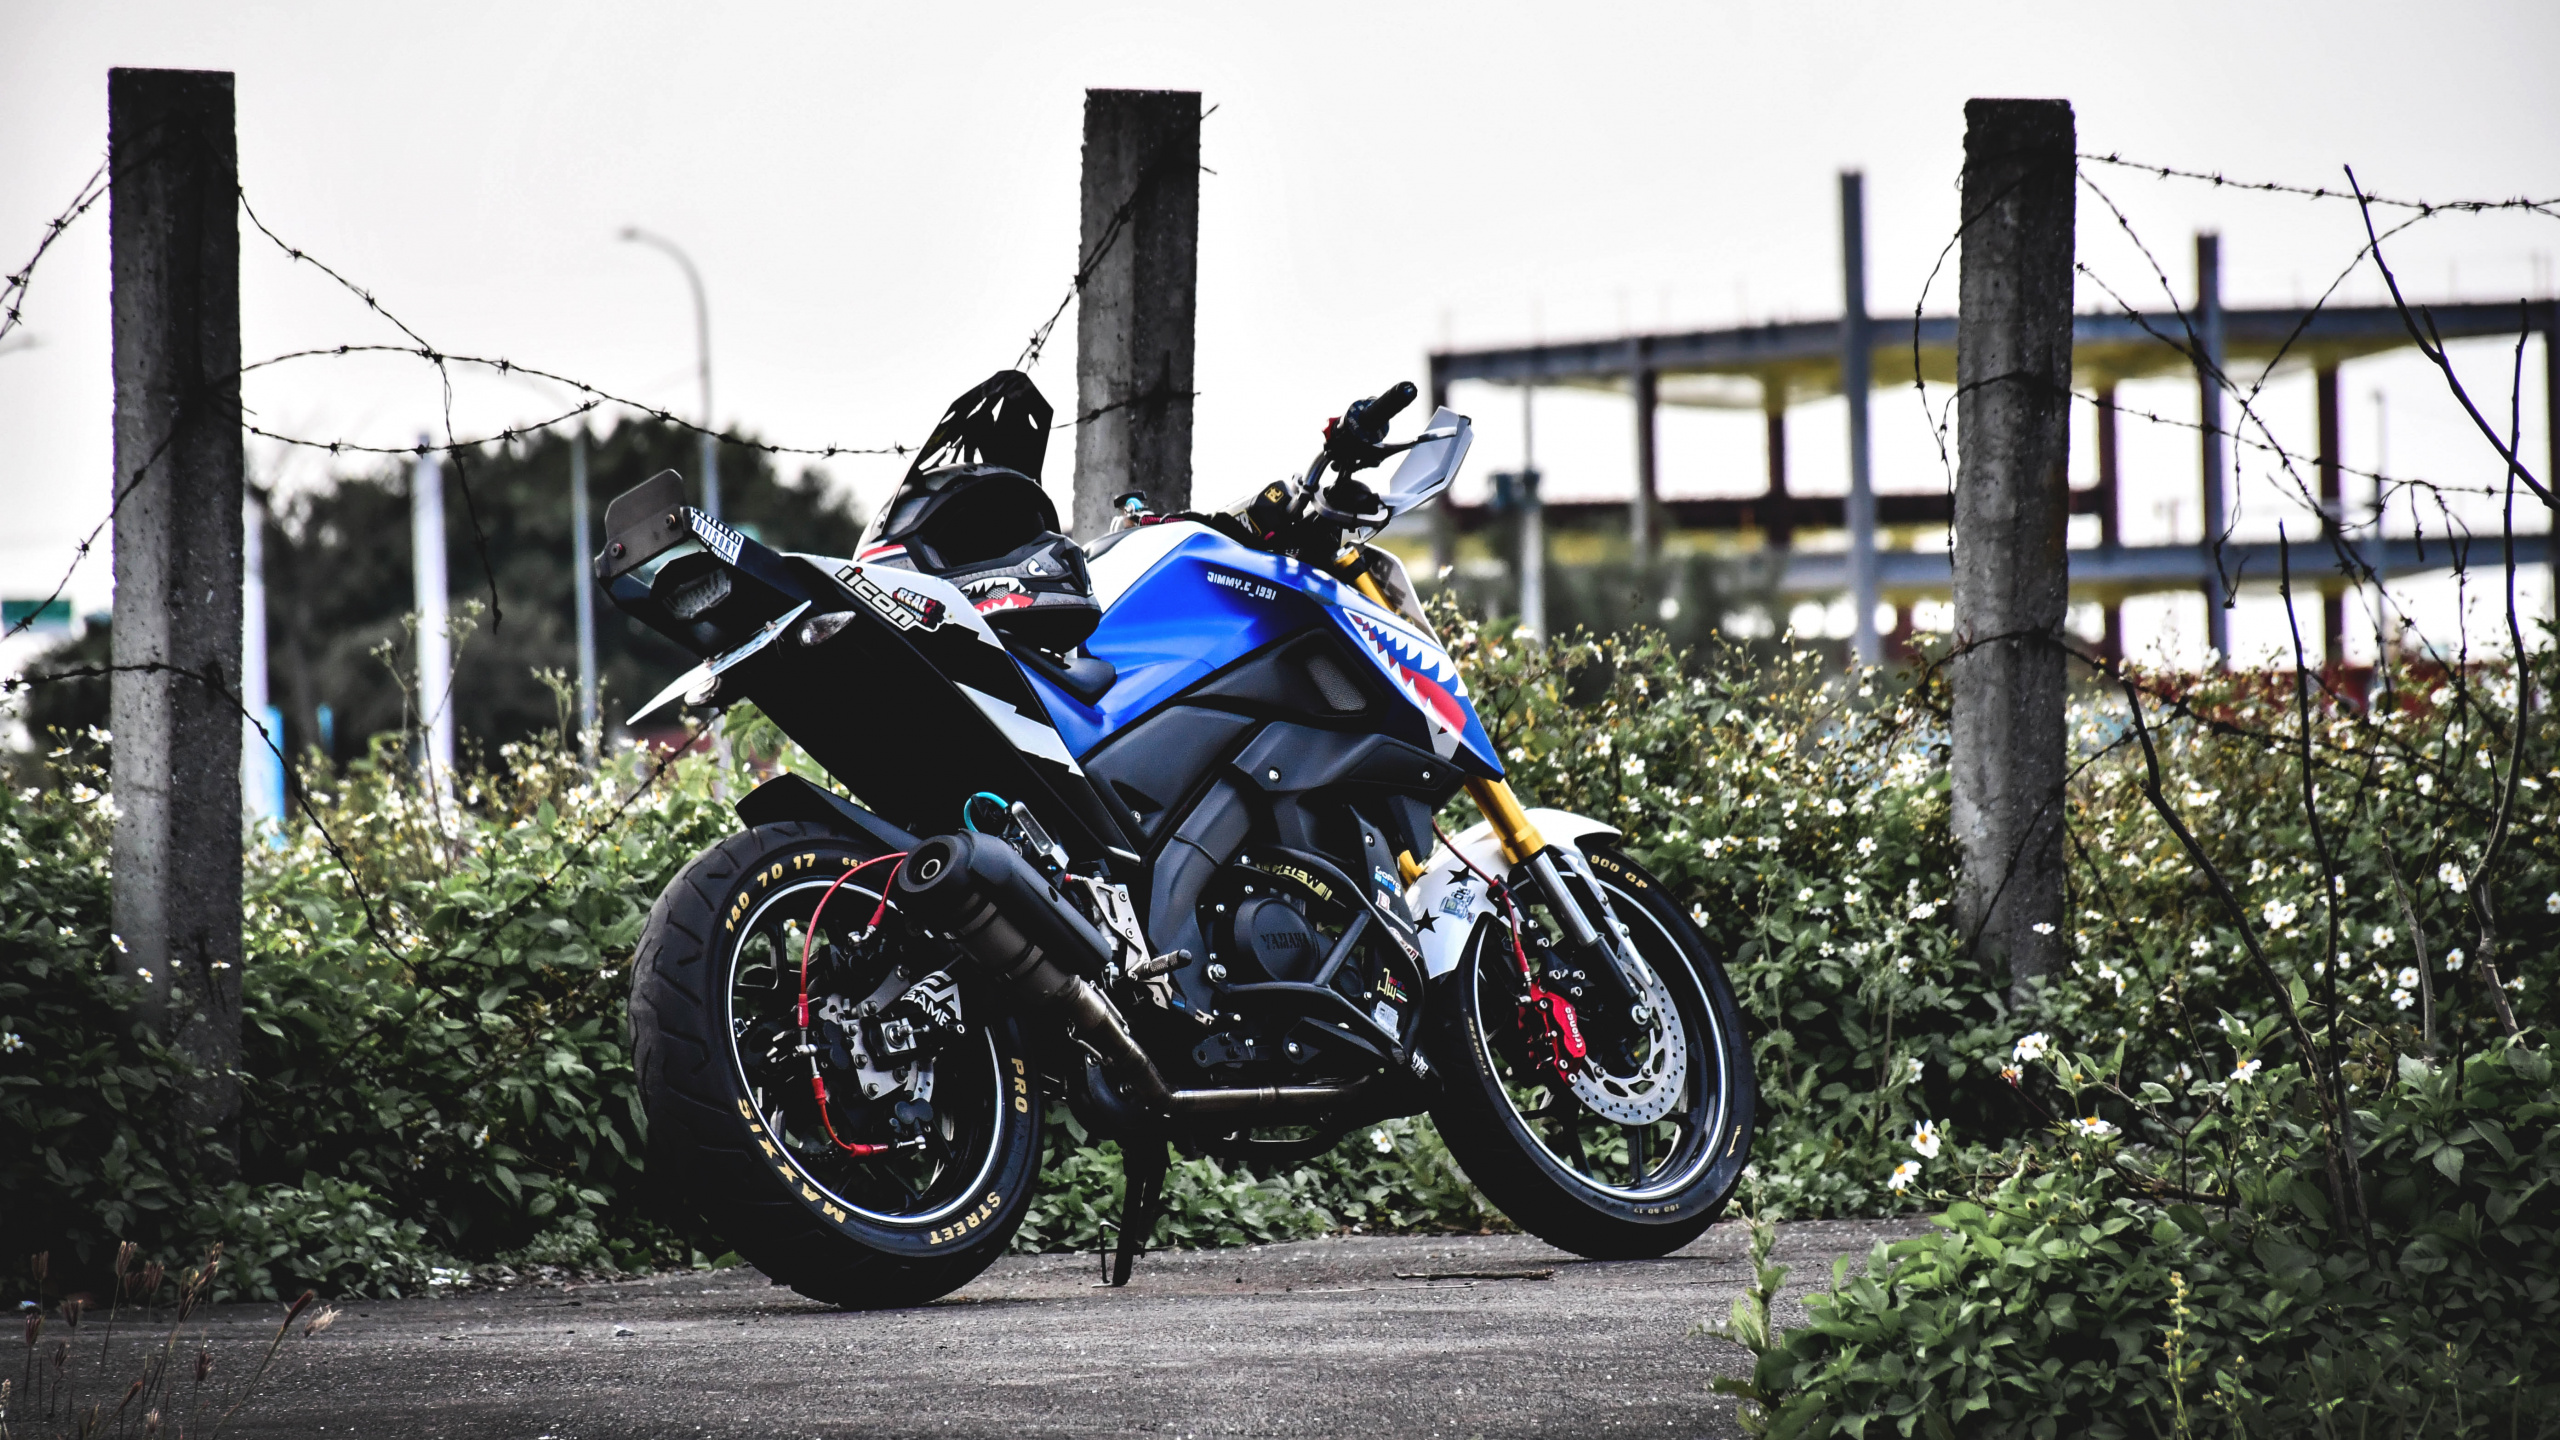 Black and Blue Sports Bike Parked on Gray Concrete Road During Daytime. Wallpaper in 2560x1440 Resolution